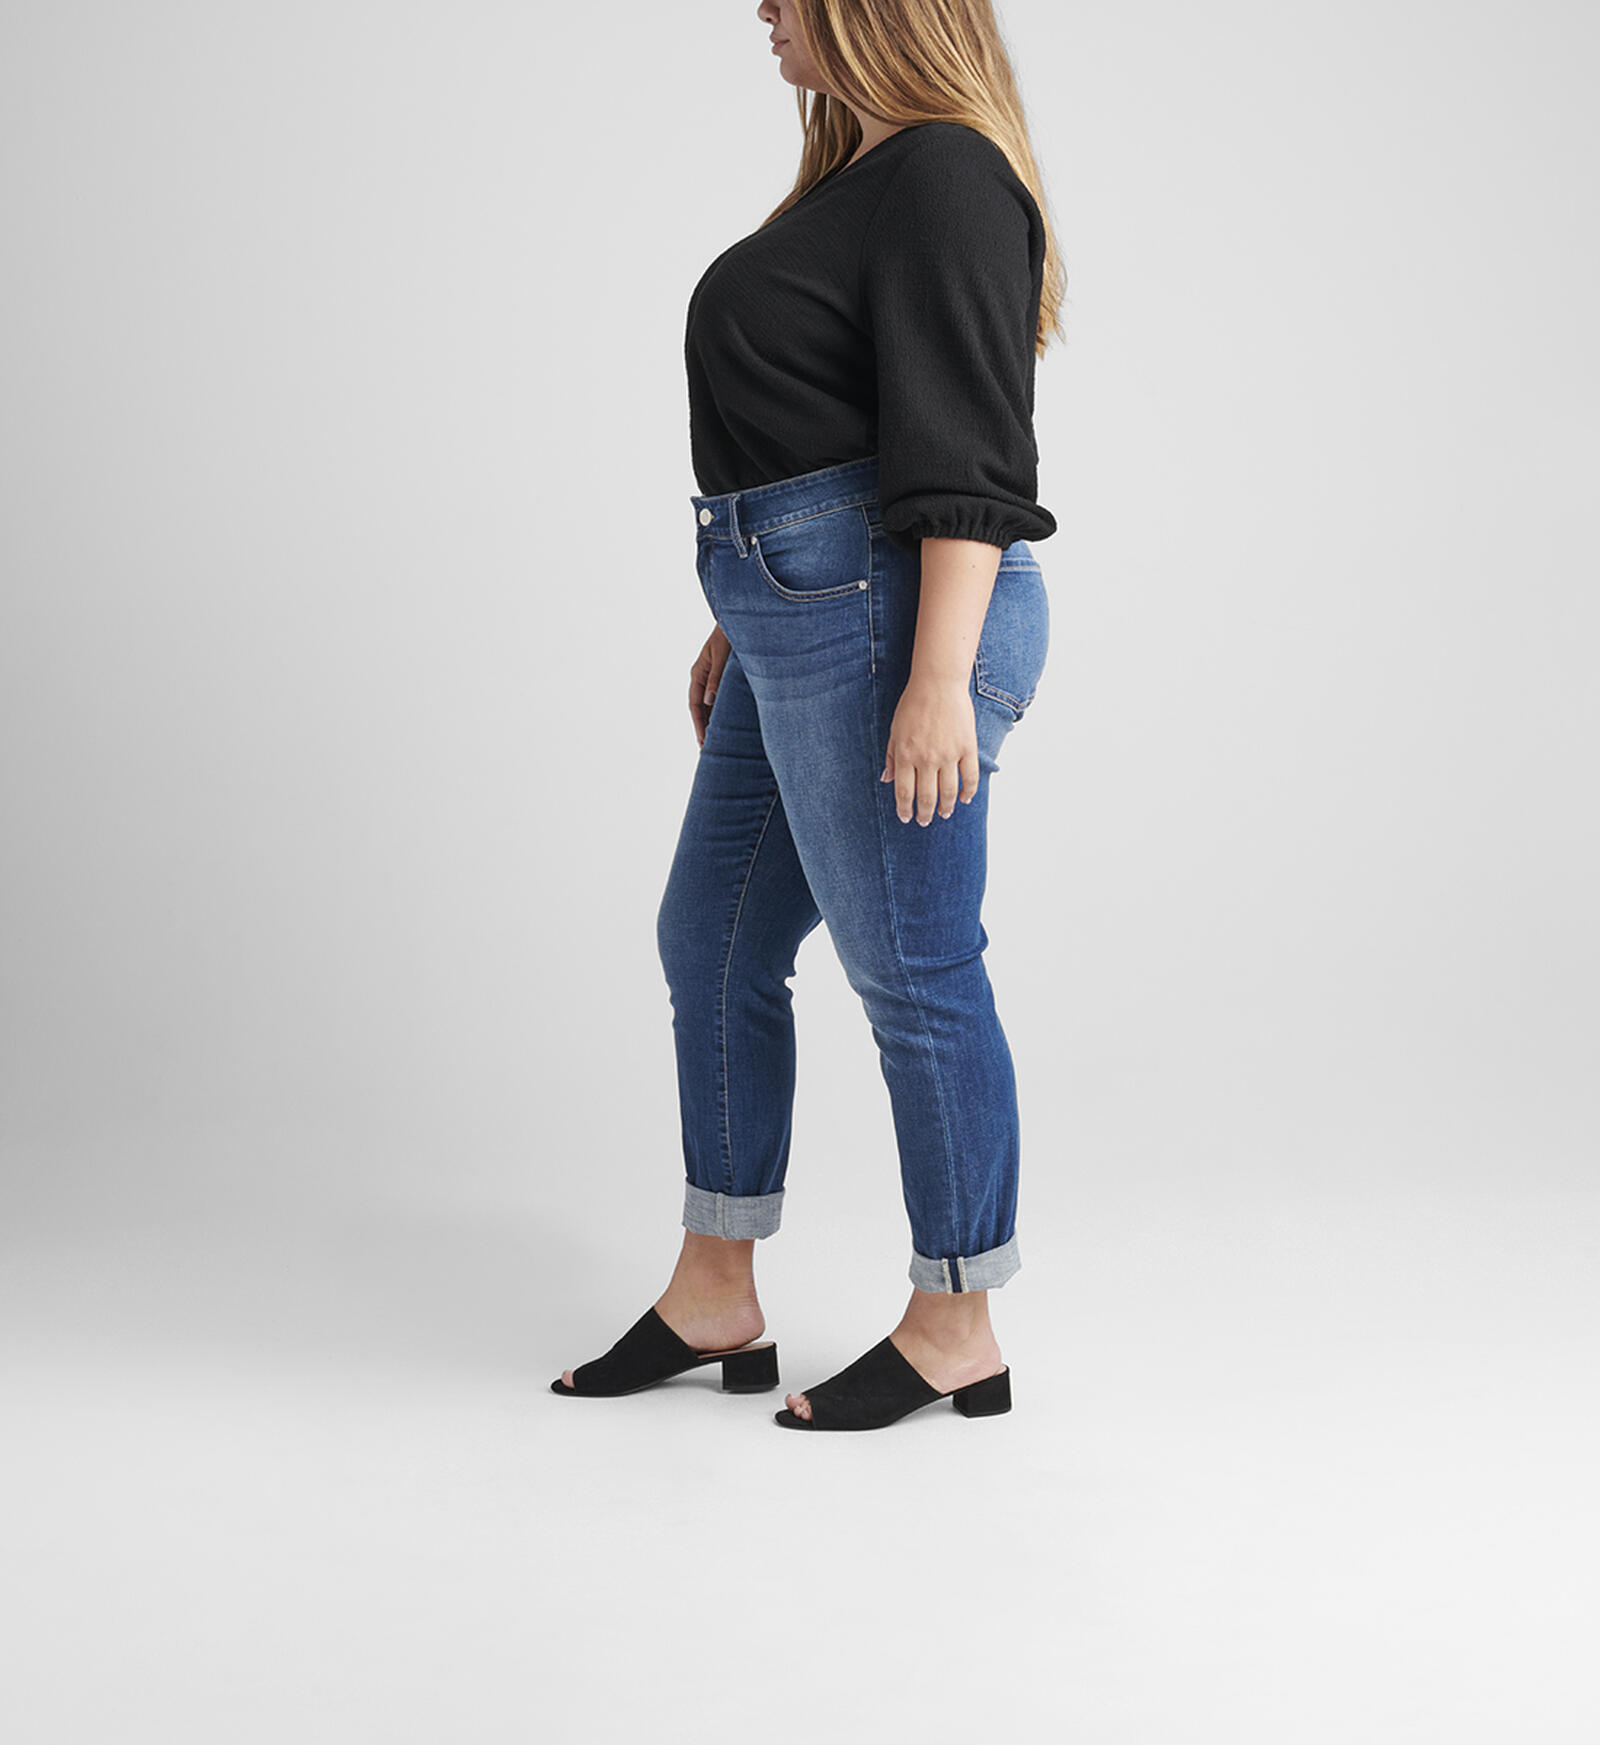 Buy Carter Mid Rise Girlfriend Jeans Plus Size for USD  | Jag Jeans US  New